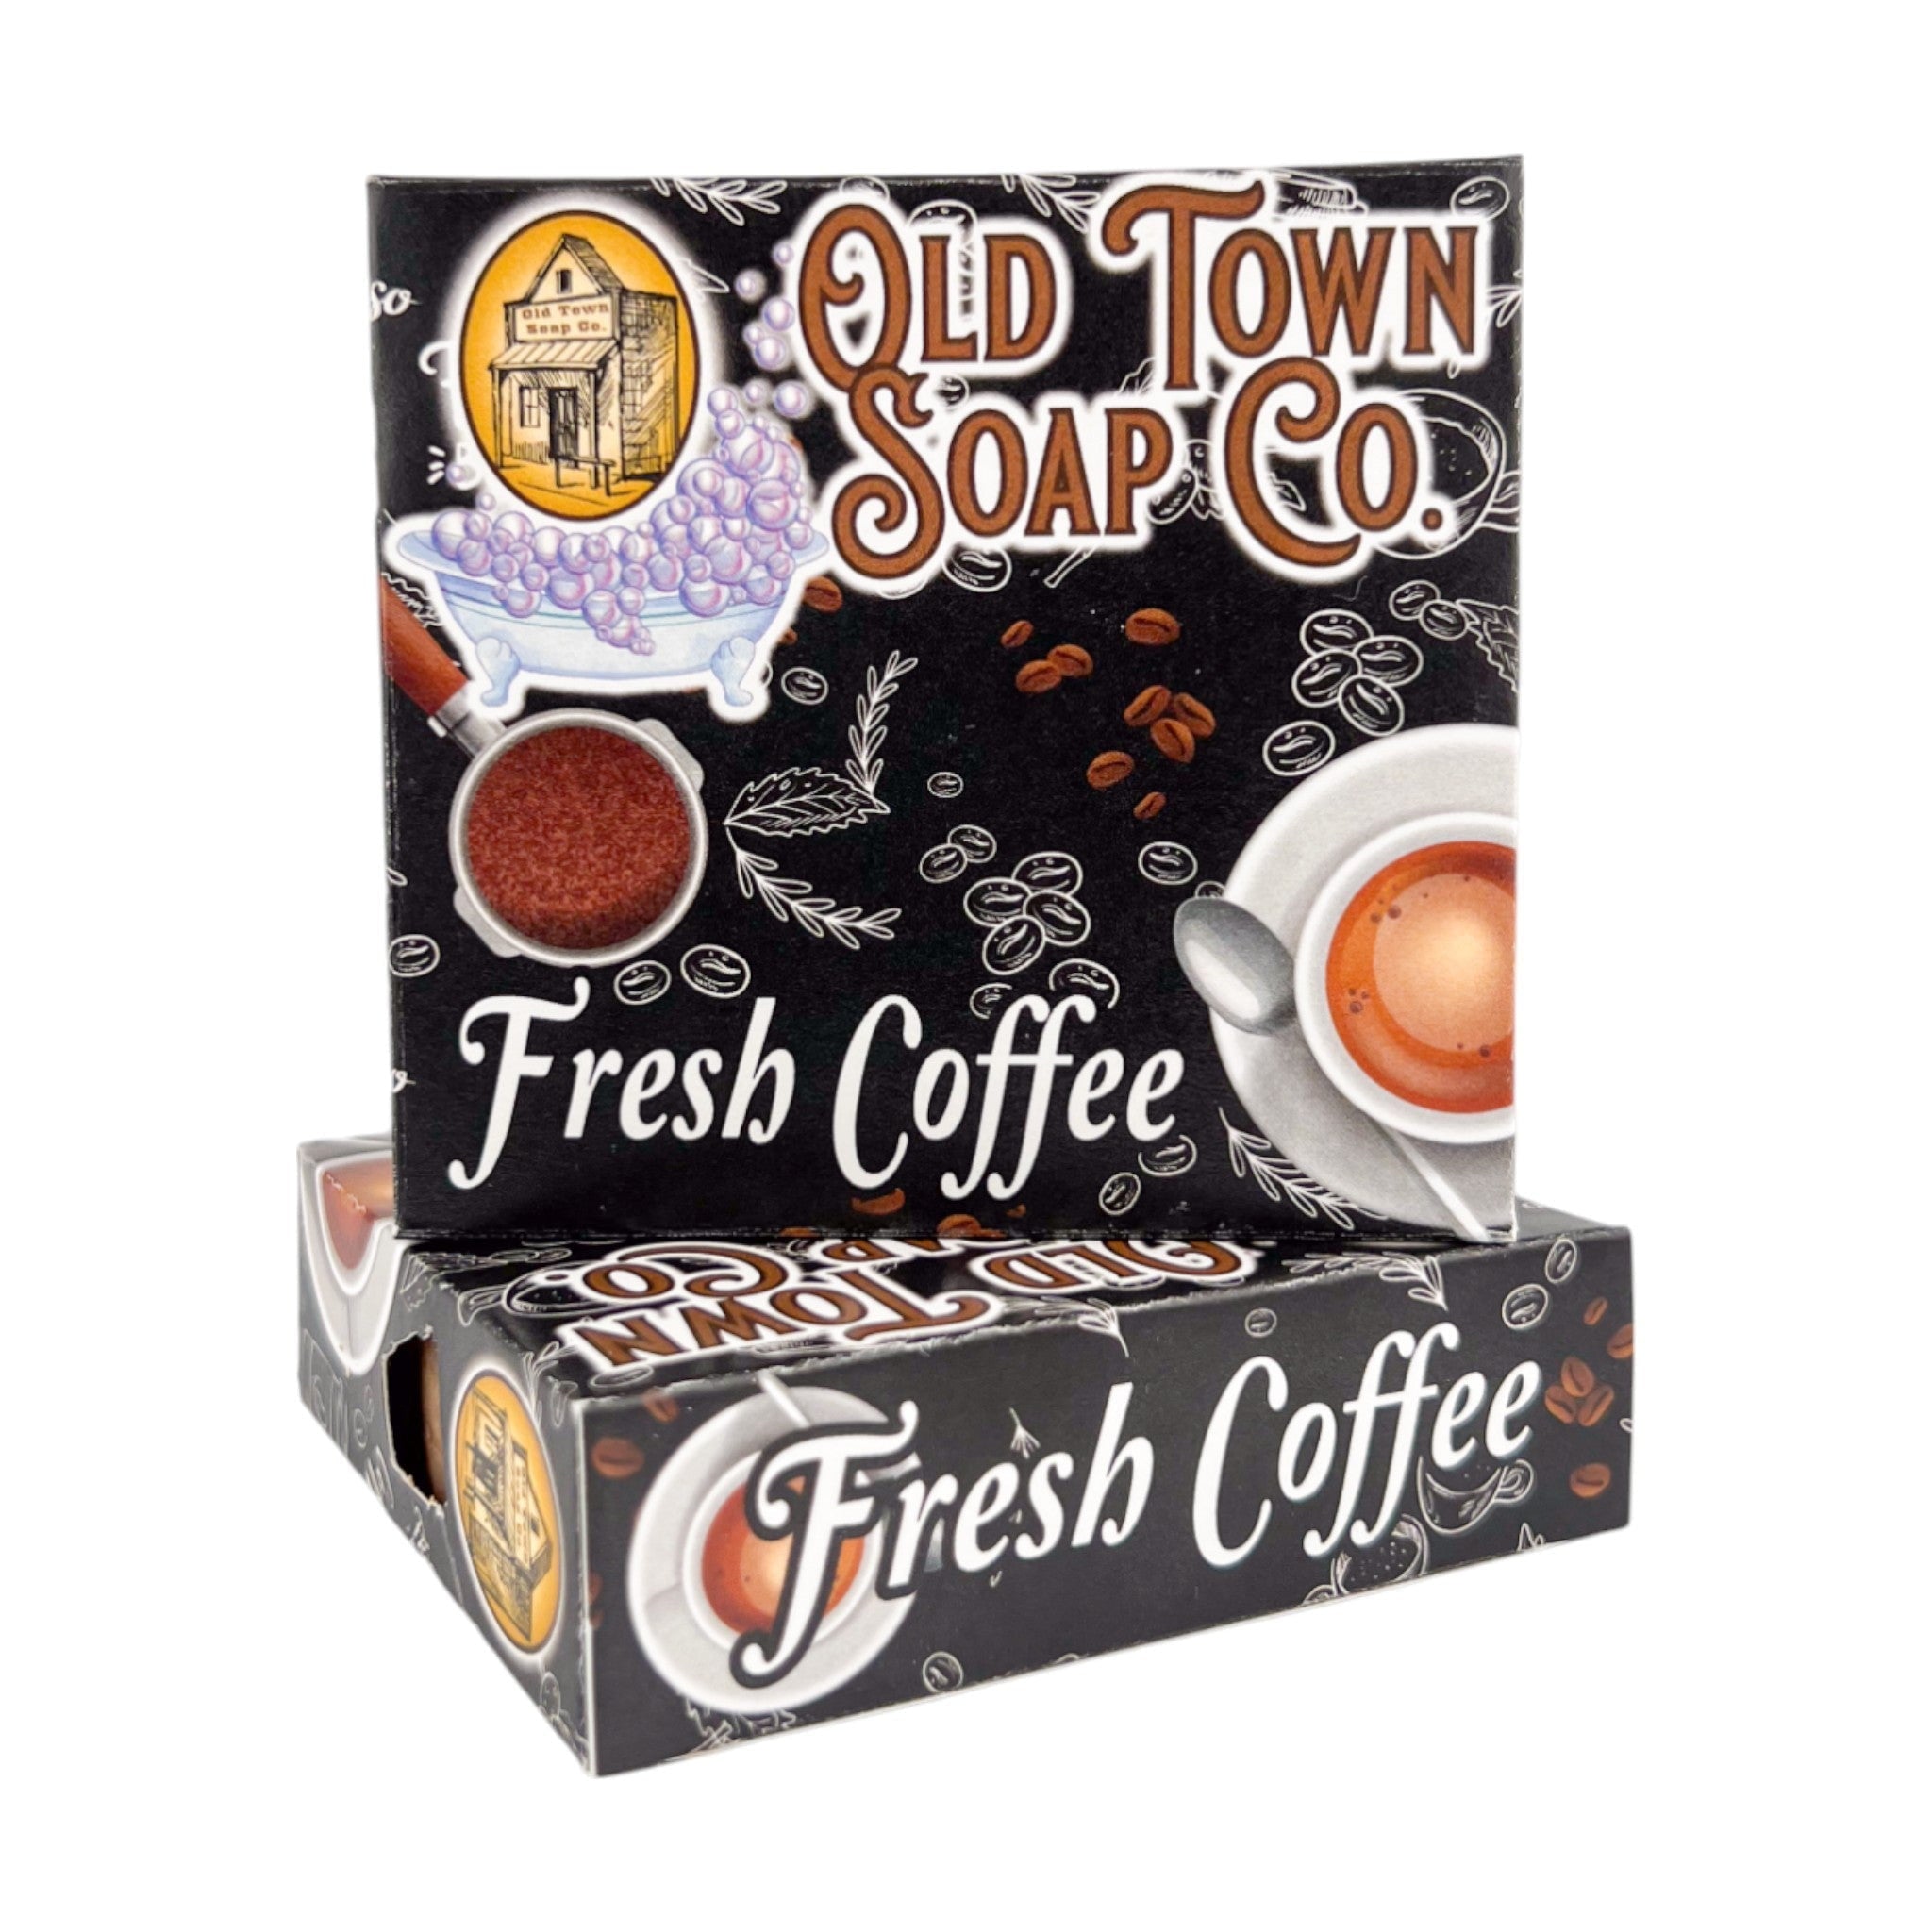 Fresh Coffee with Exfoliating Coffee Grounds Bar Soap - Old Town Soap Co.